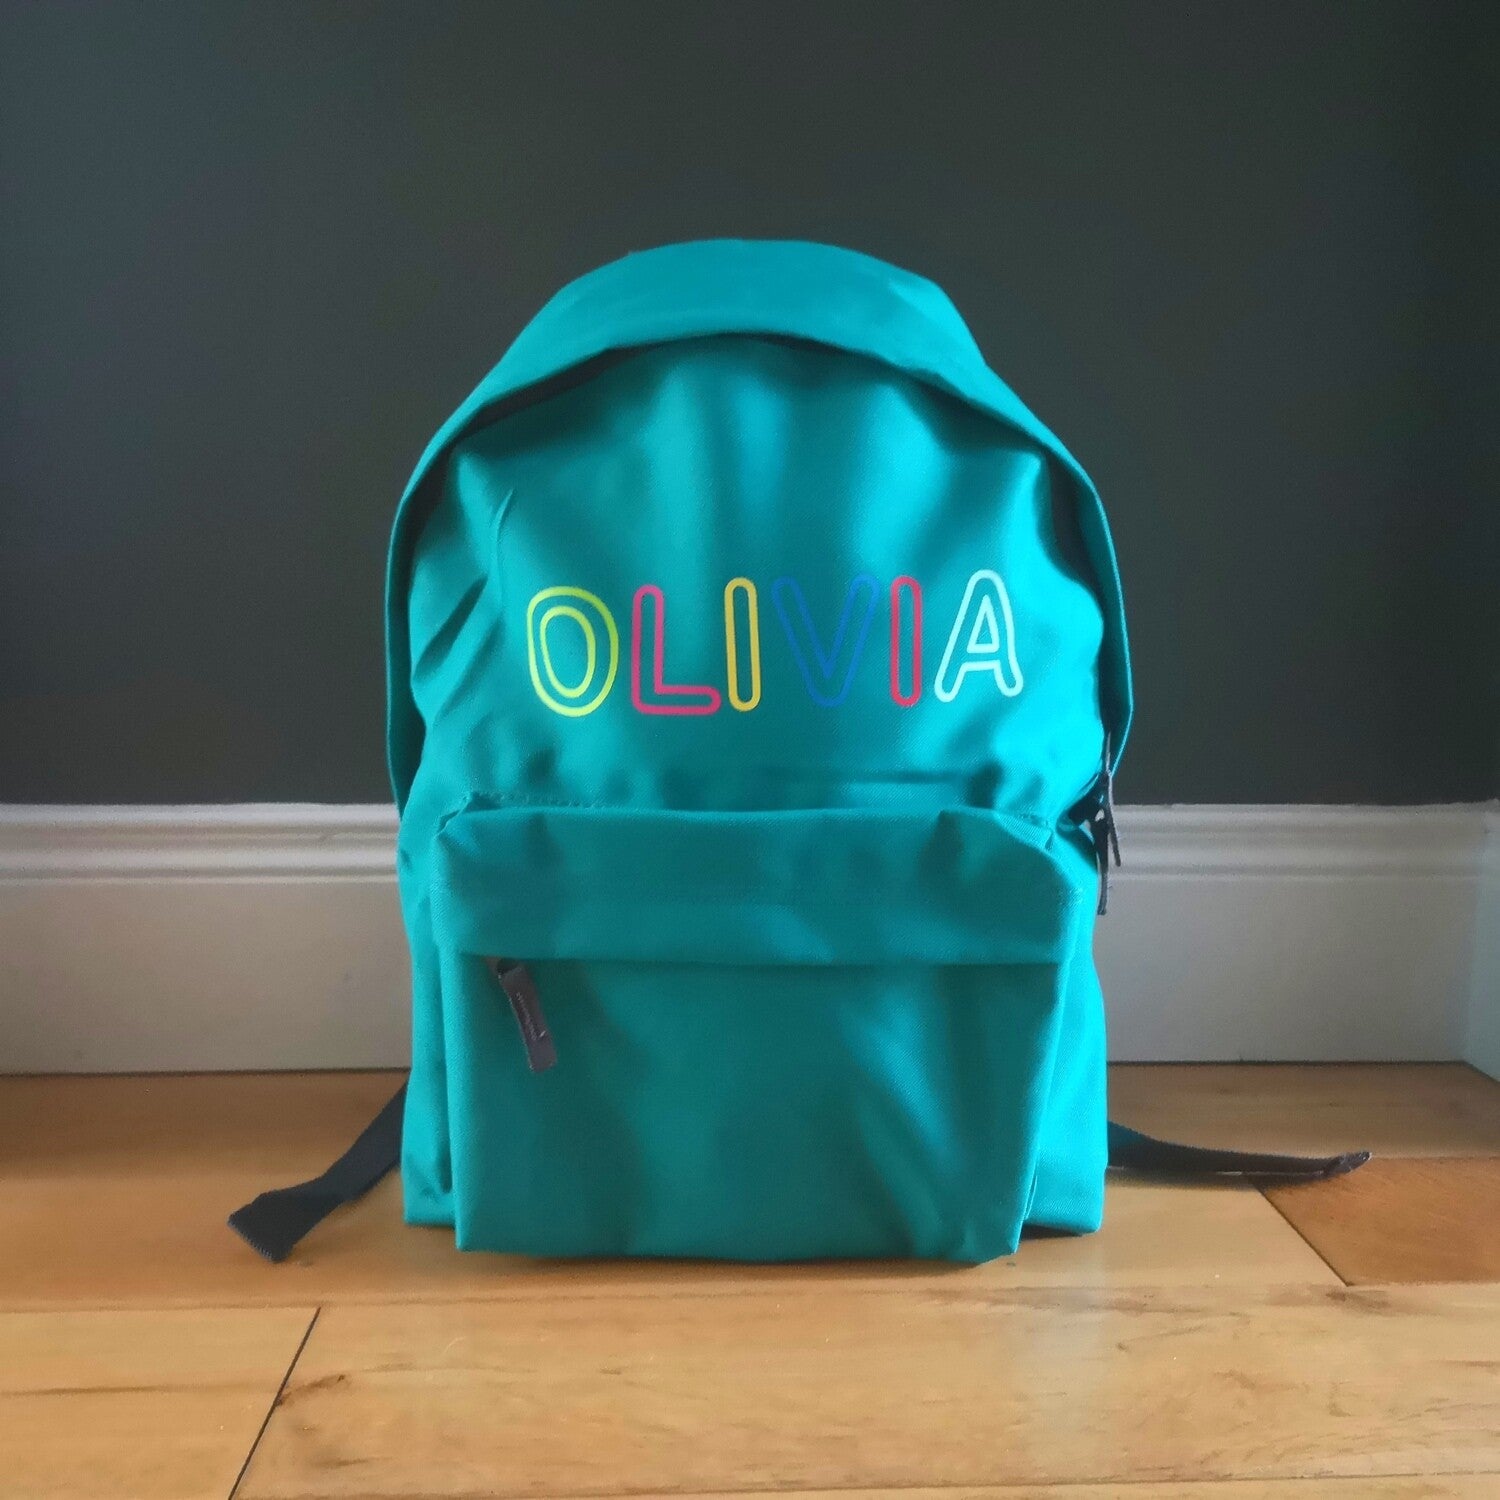 An emerald green kids backpack with their name written along the top in different coloured letters